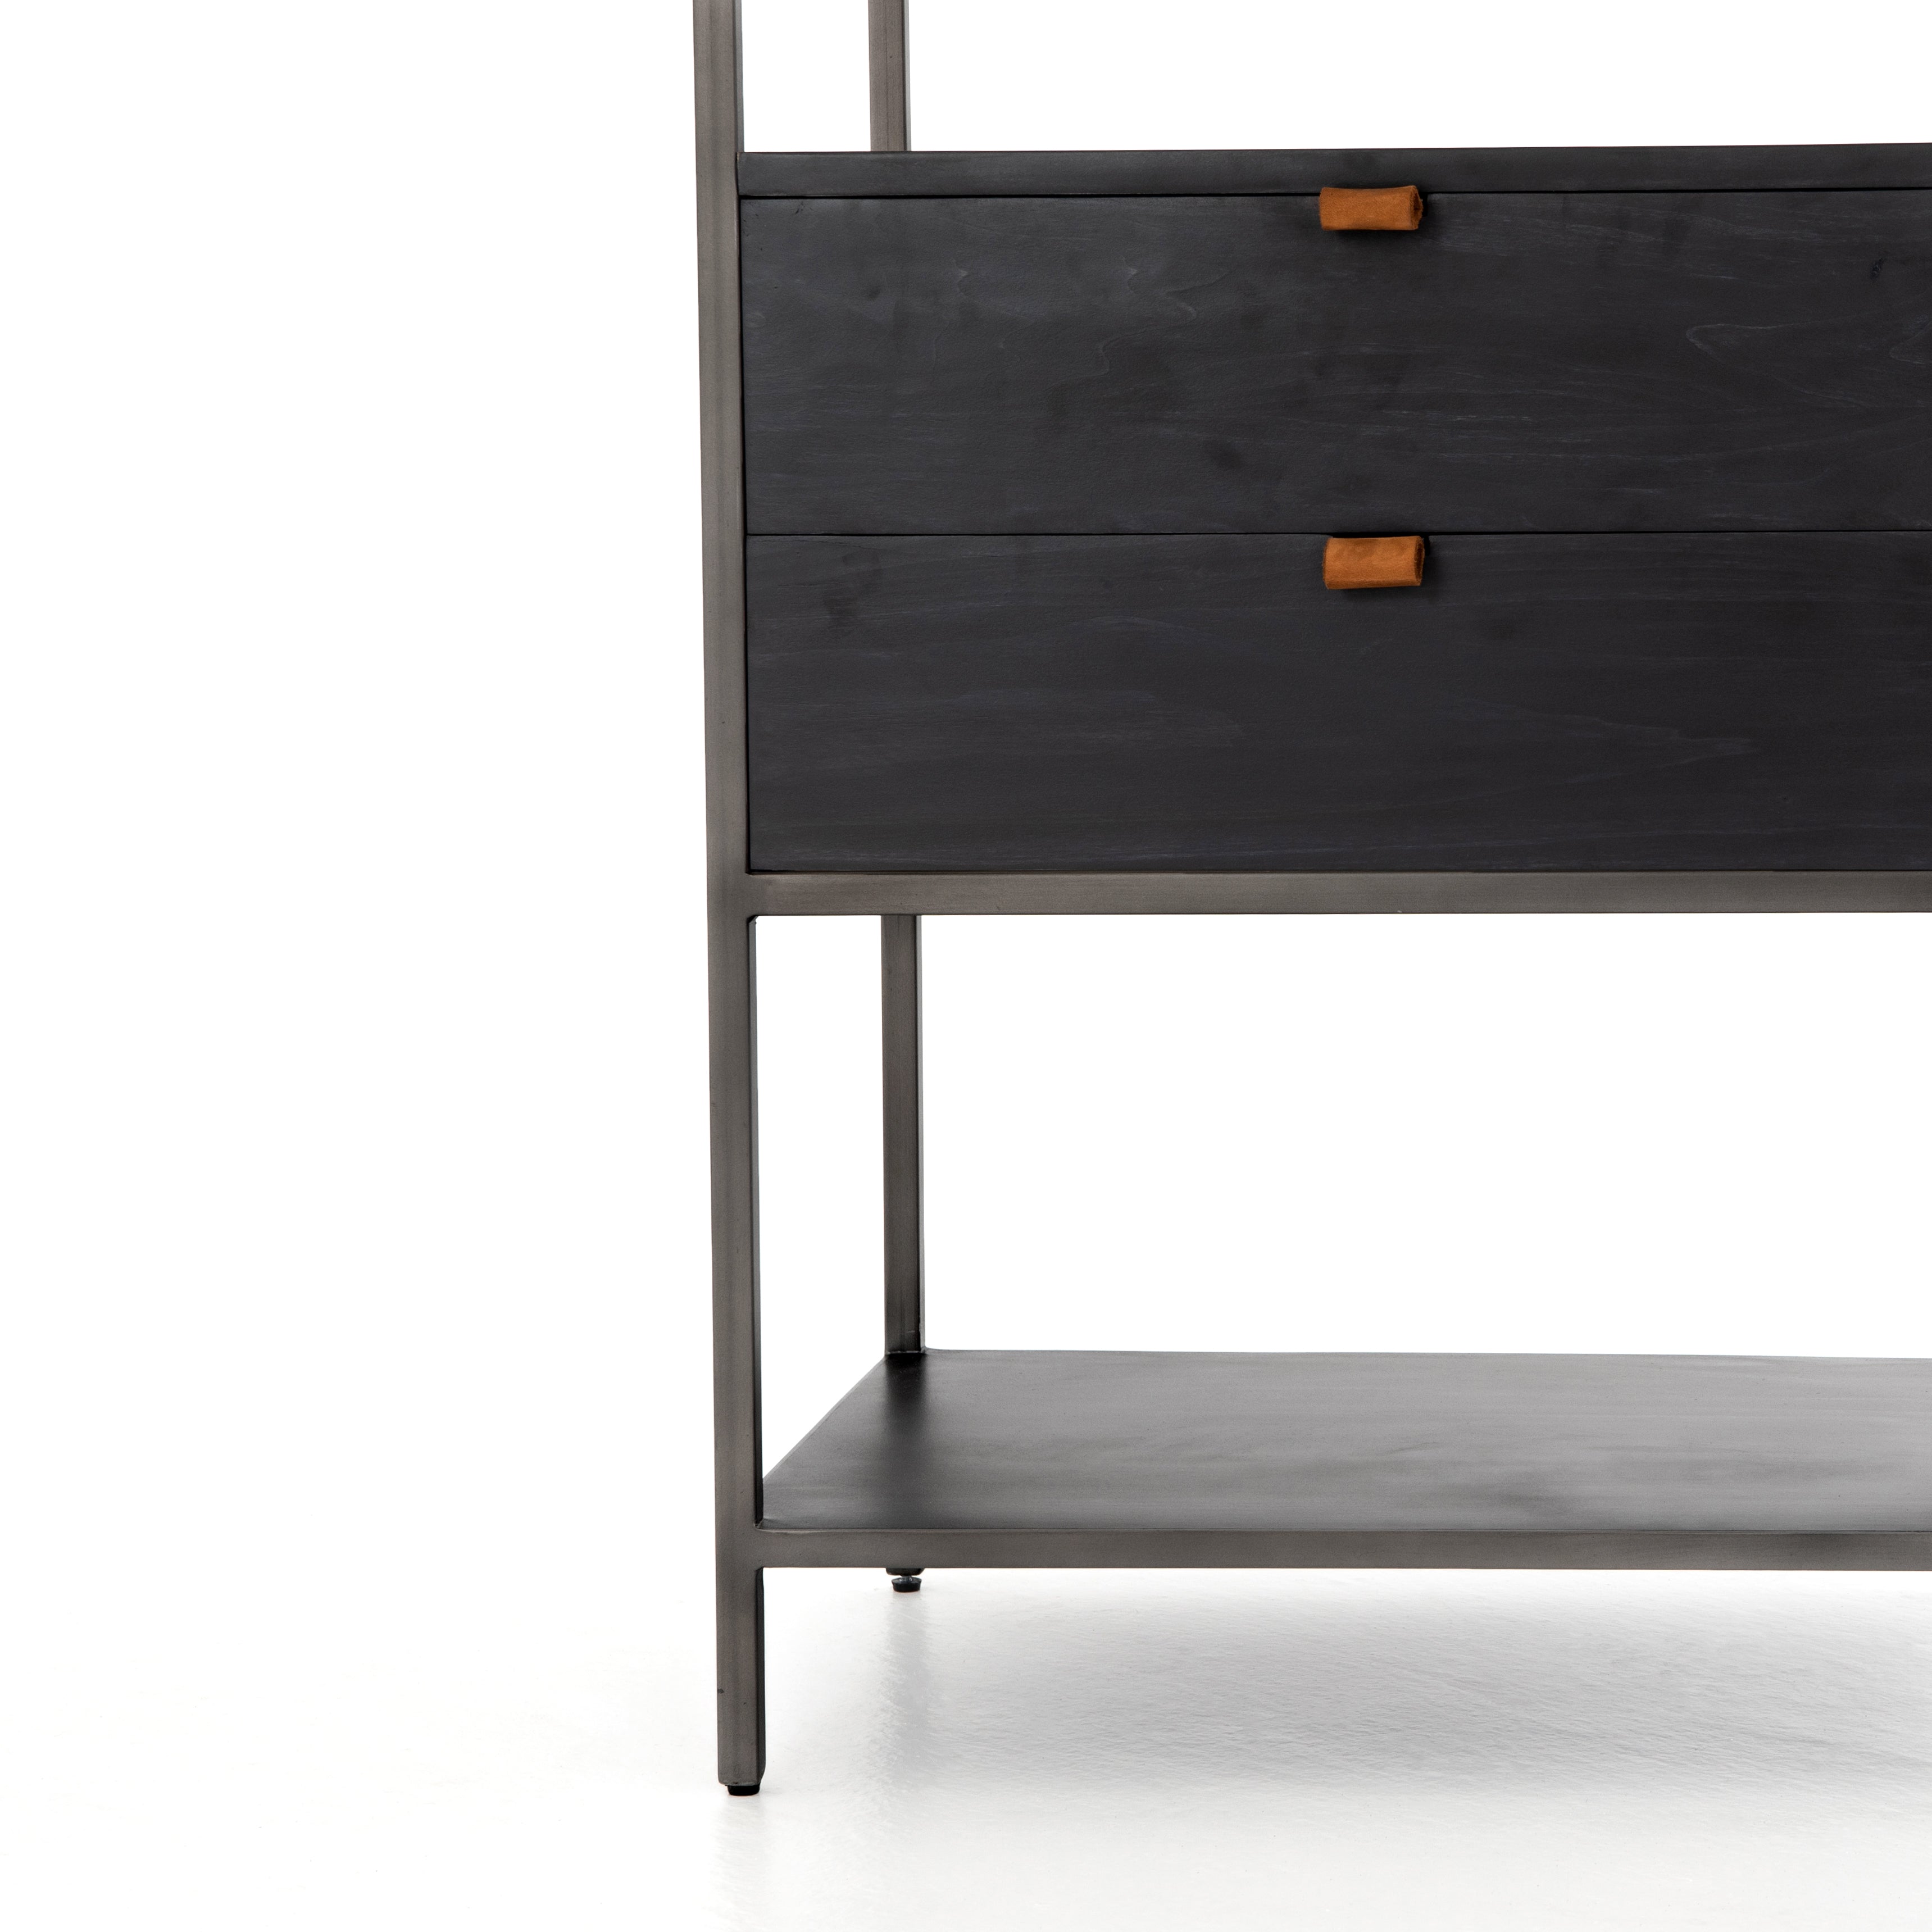 This stylish Trey Bookshelf - Black Wash Poplar offers ample storage space by way of open shelving and dual drawers. Metal-secured pulls of toffee top-grain leather add a textural element of surprise to any office, bedroom, or other space.   Overall Dimensions: 24.00"w x 18.00"d x 78.25"h